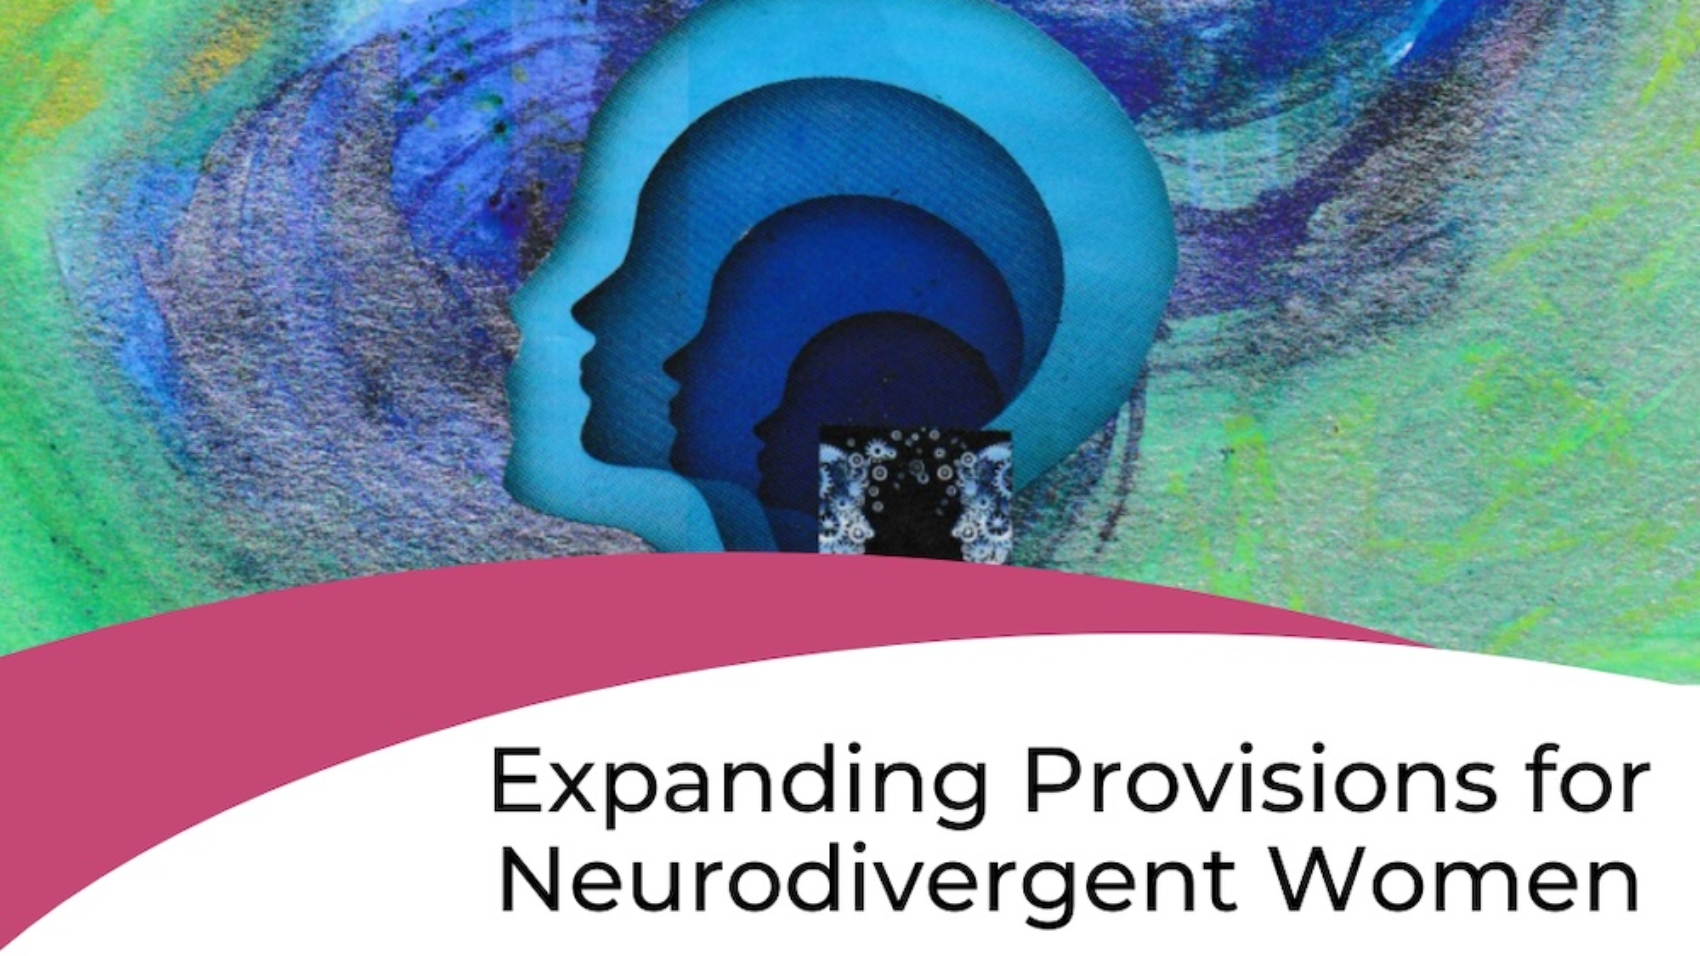 Expanding provisions for neurodivergent women